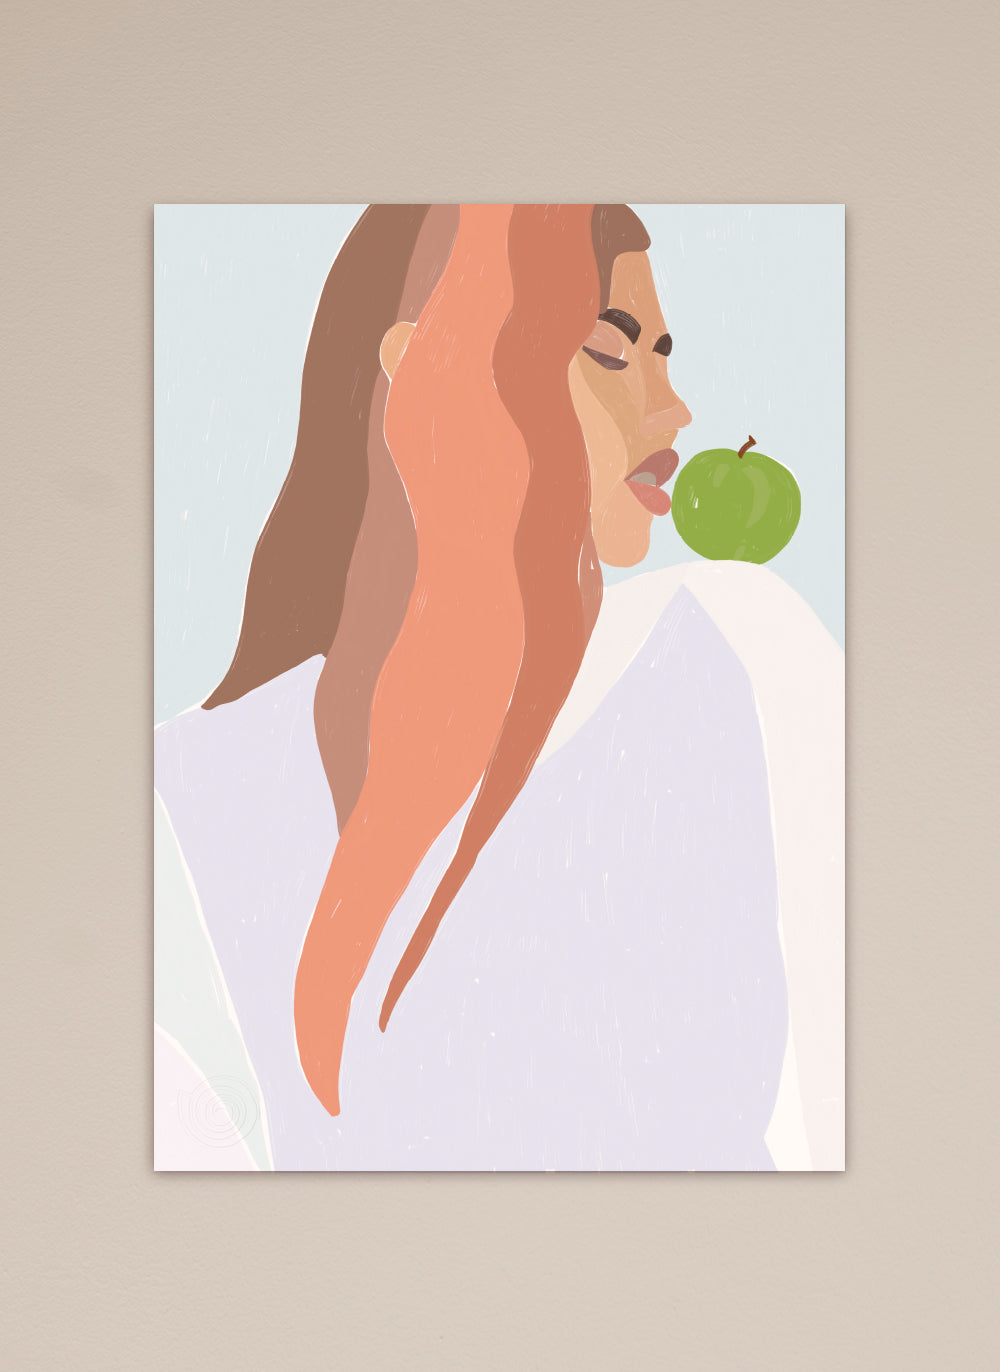 eat the apple art print poster kitchen collection green